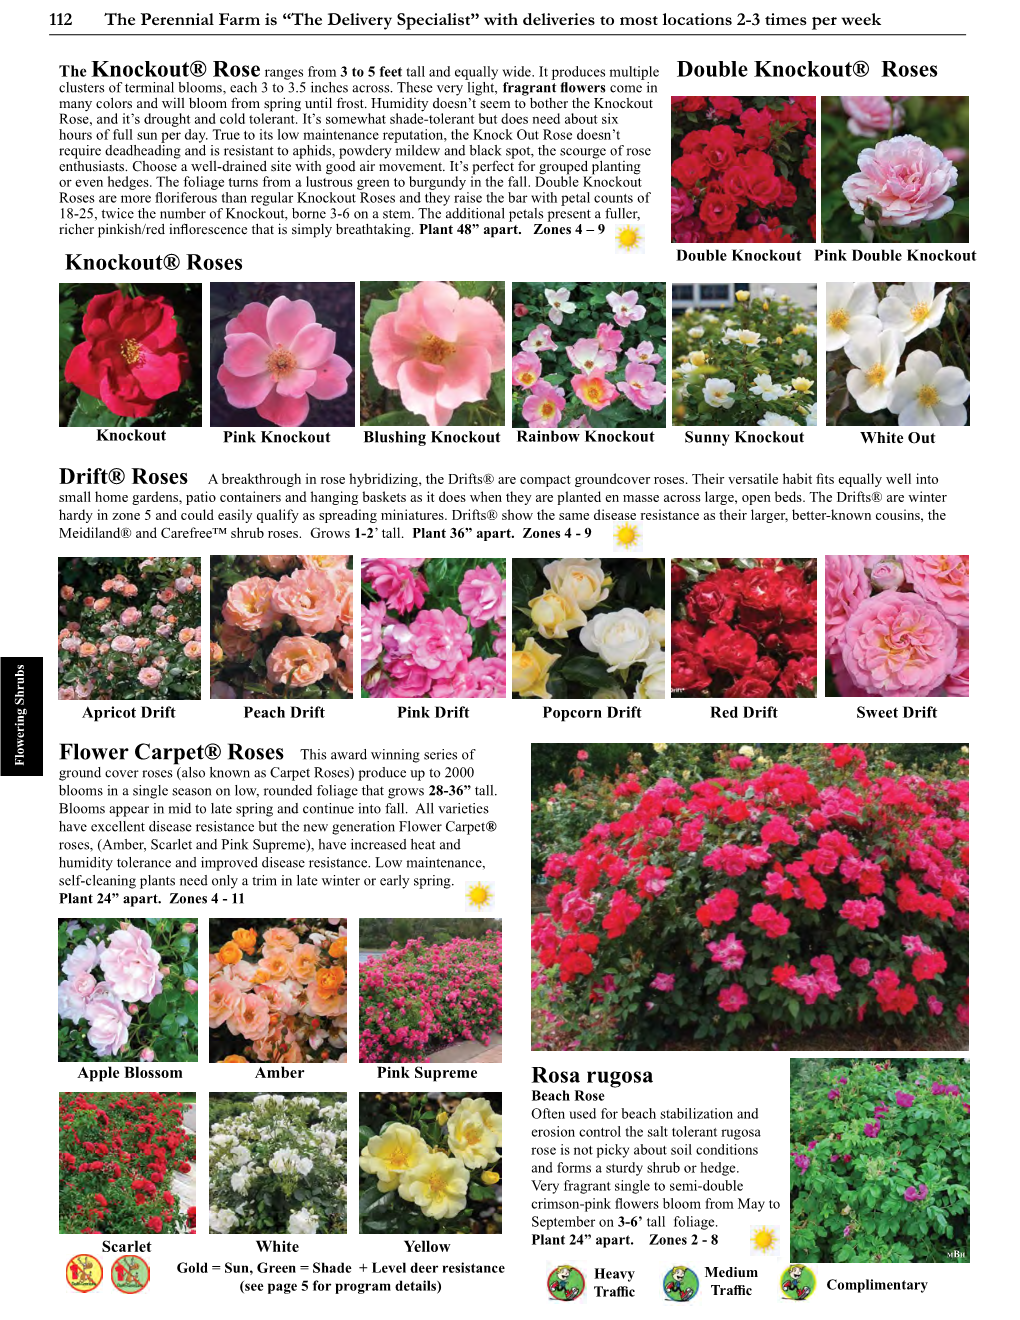 Knockout® Roses Double Knockout® Roses Rosa Rugosa